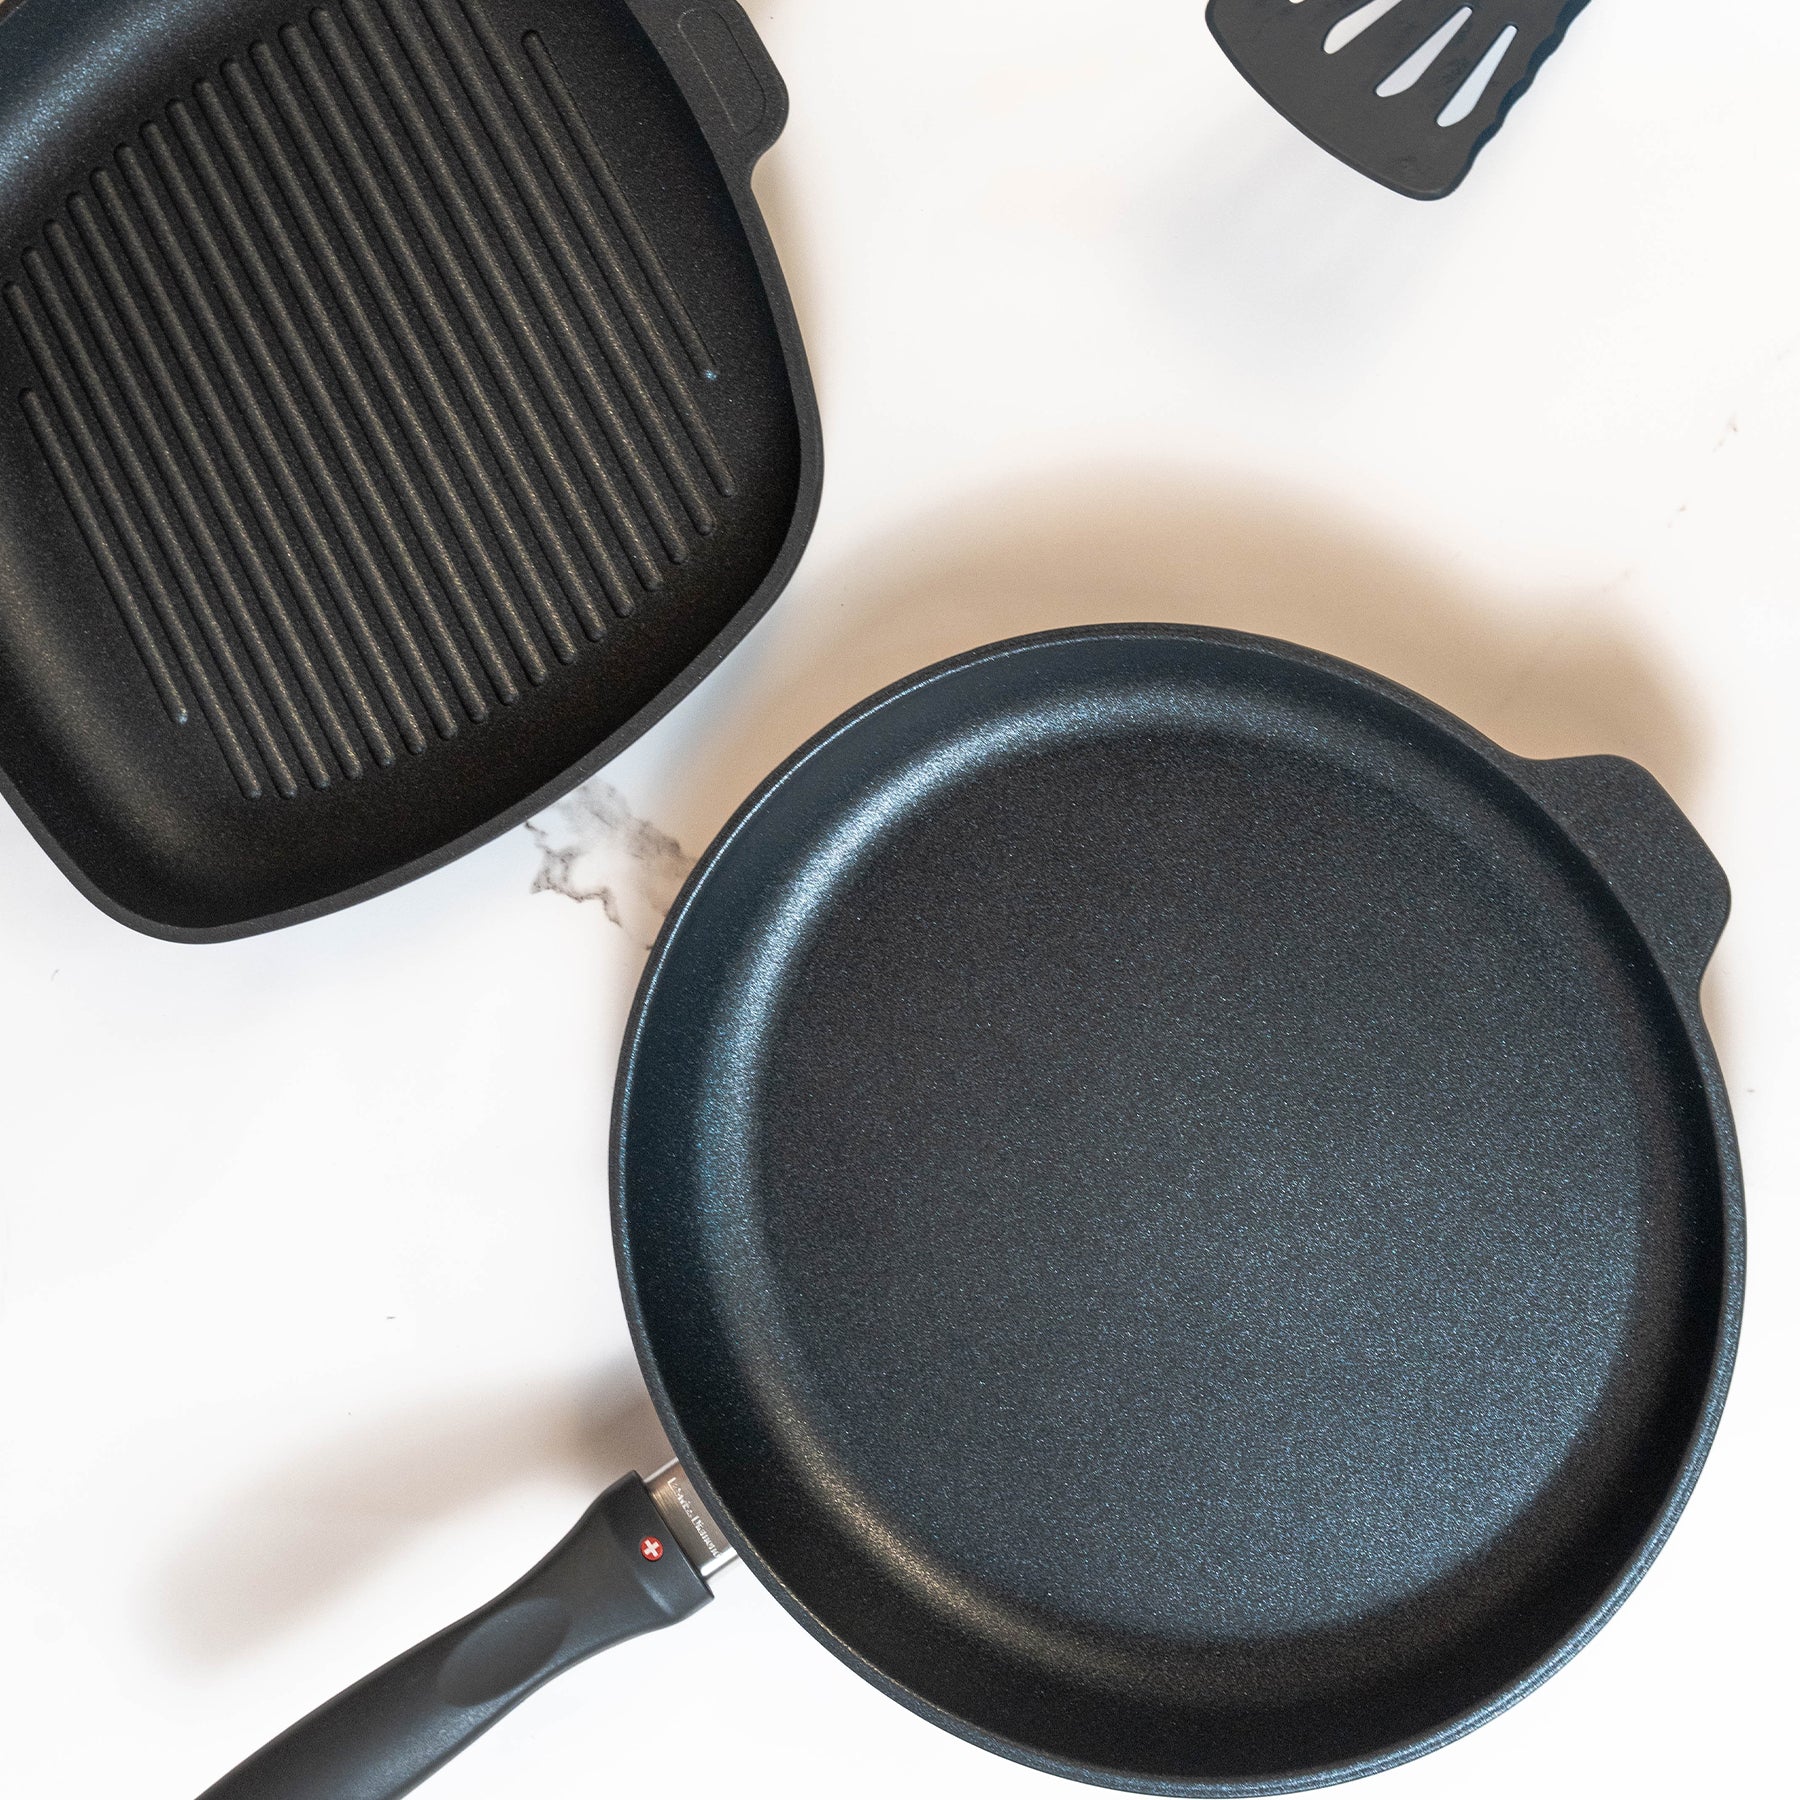 XD Nonstick 2-Piece Set - Fry Pan & Grill Pan in use on kicthen counter - top view